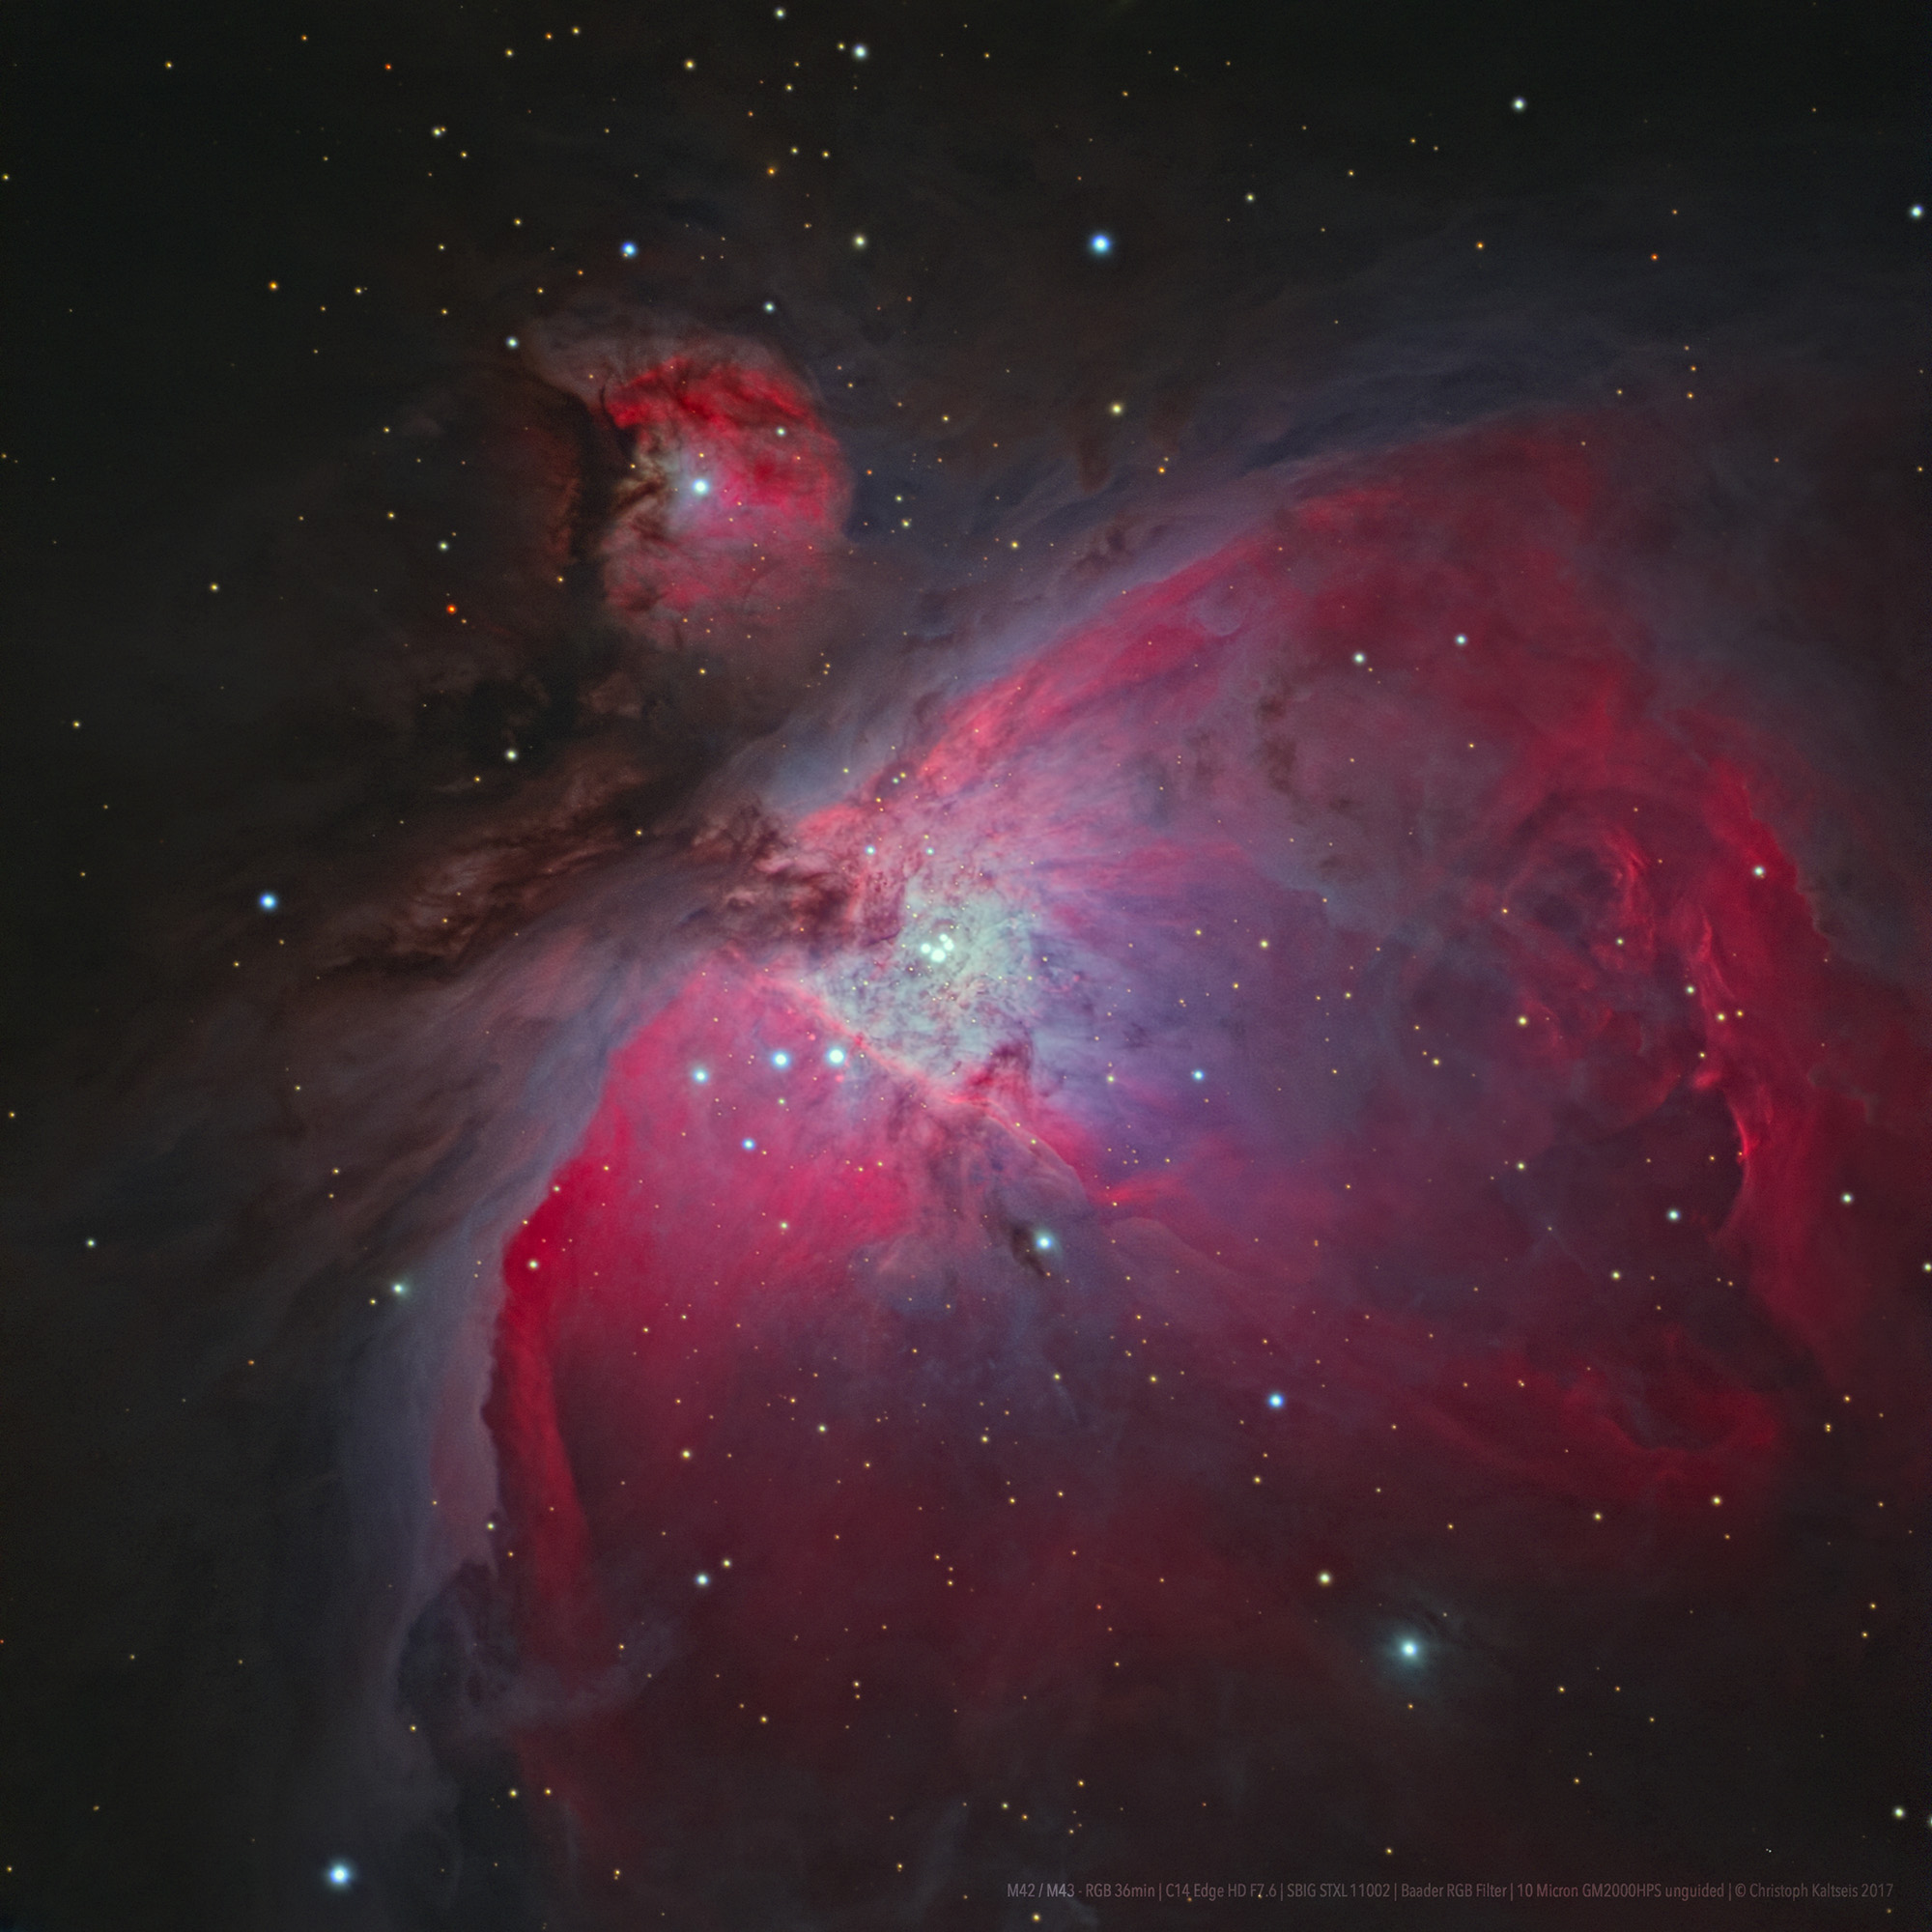 At the Heart of Orion